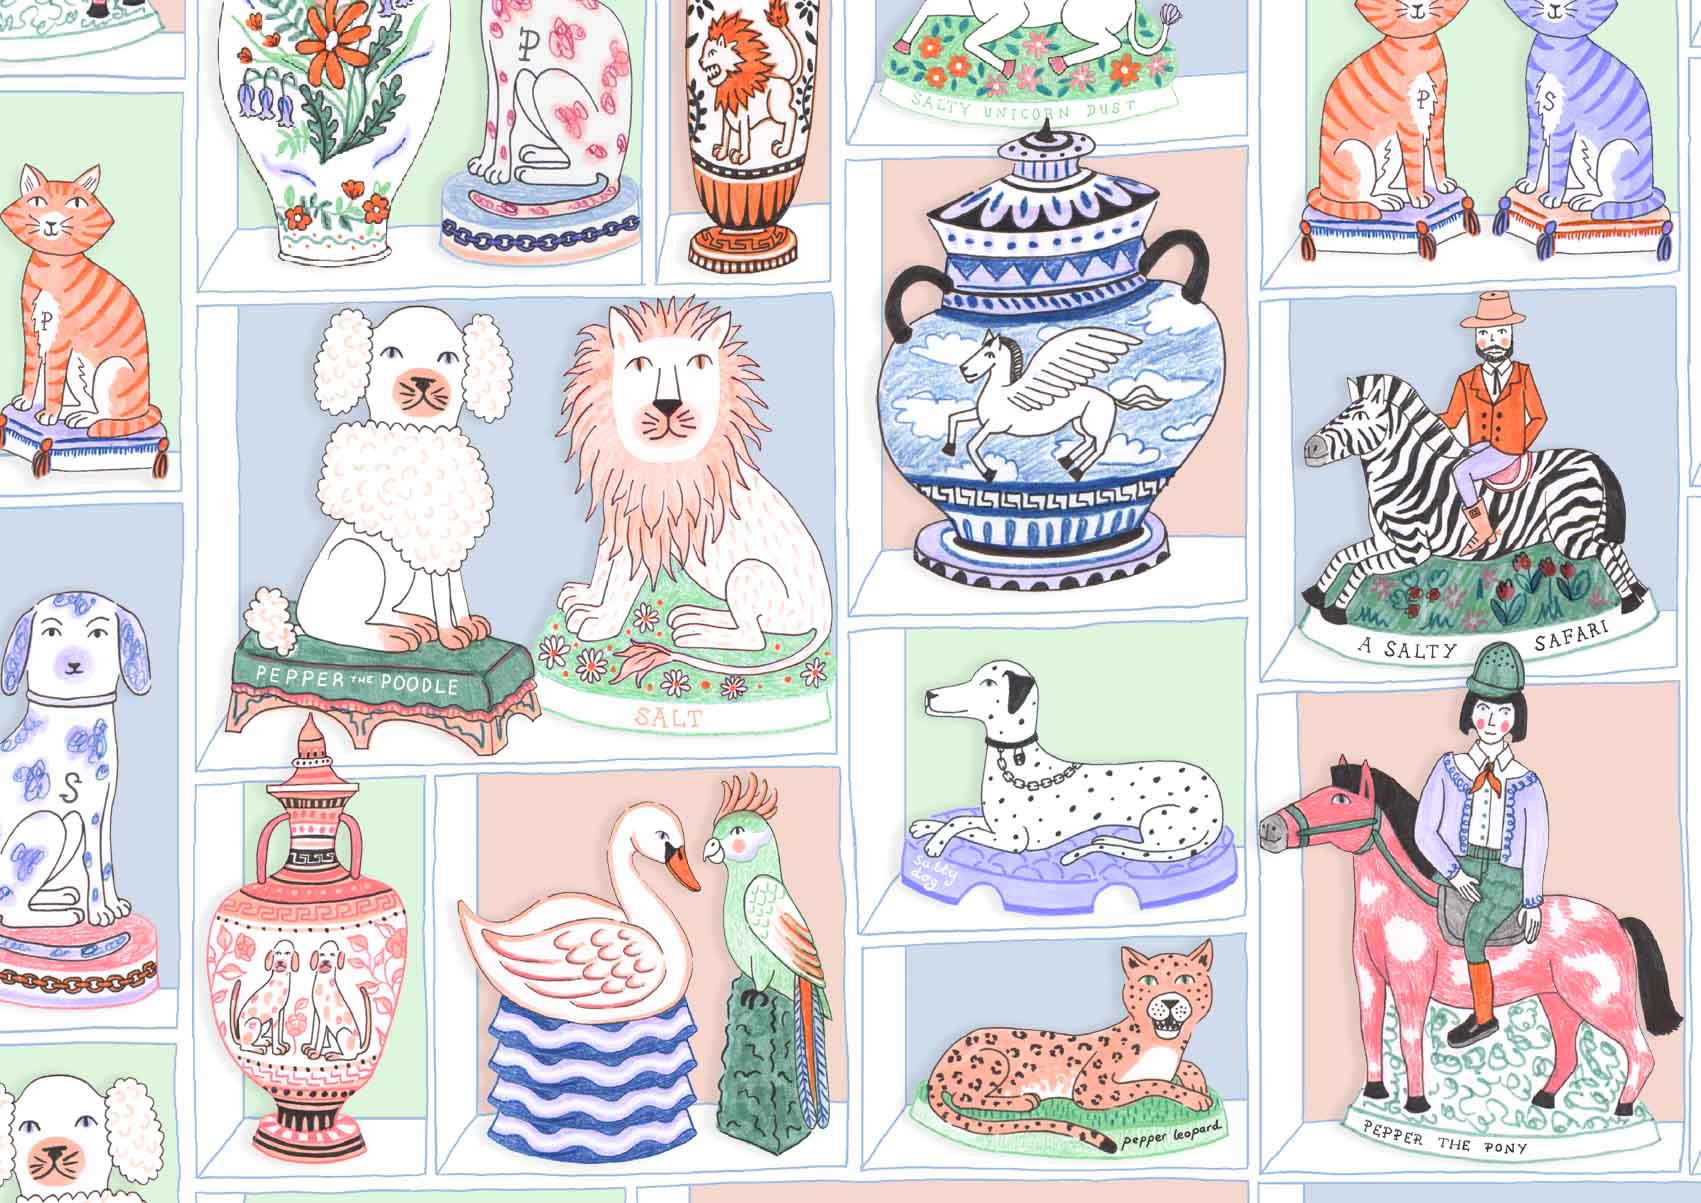 Salt-and-Pepper-shaker-collection-Illustrated-by-Jacqueline-Colley.jpg